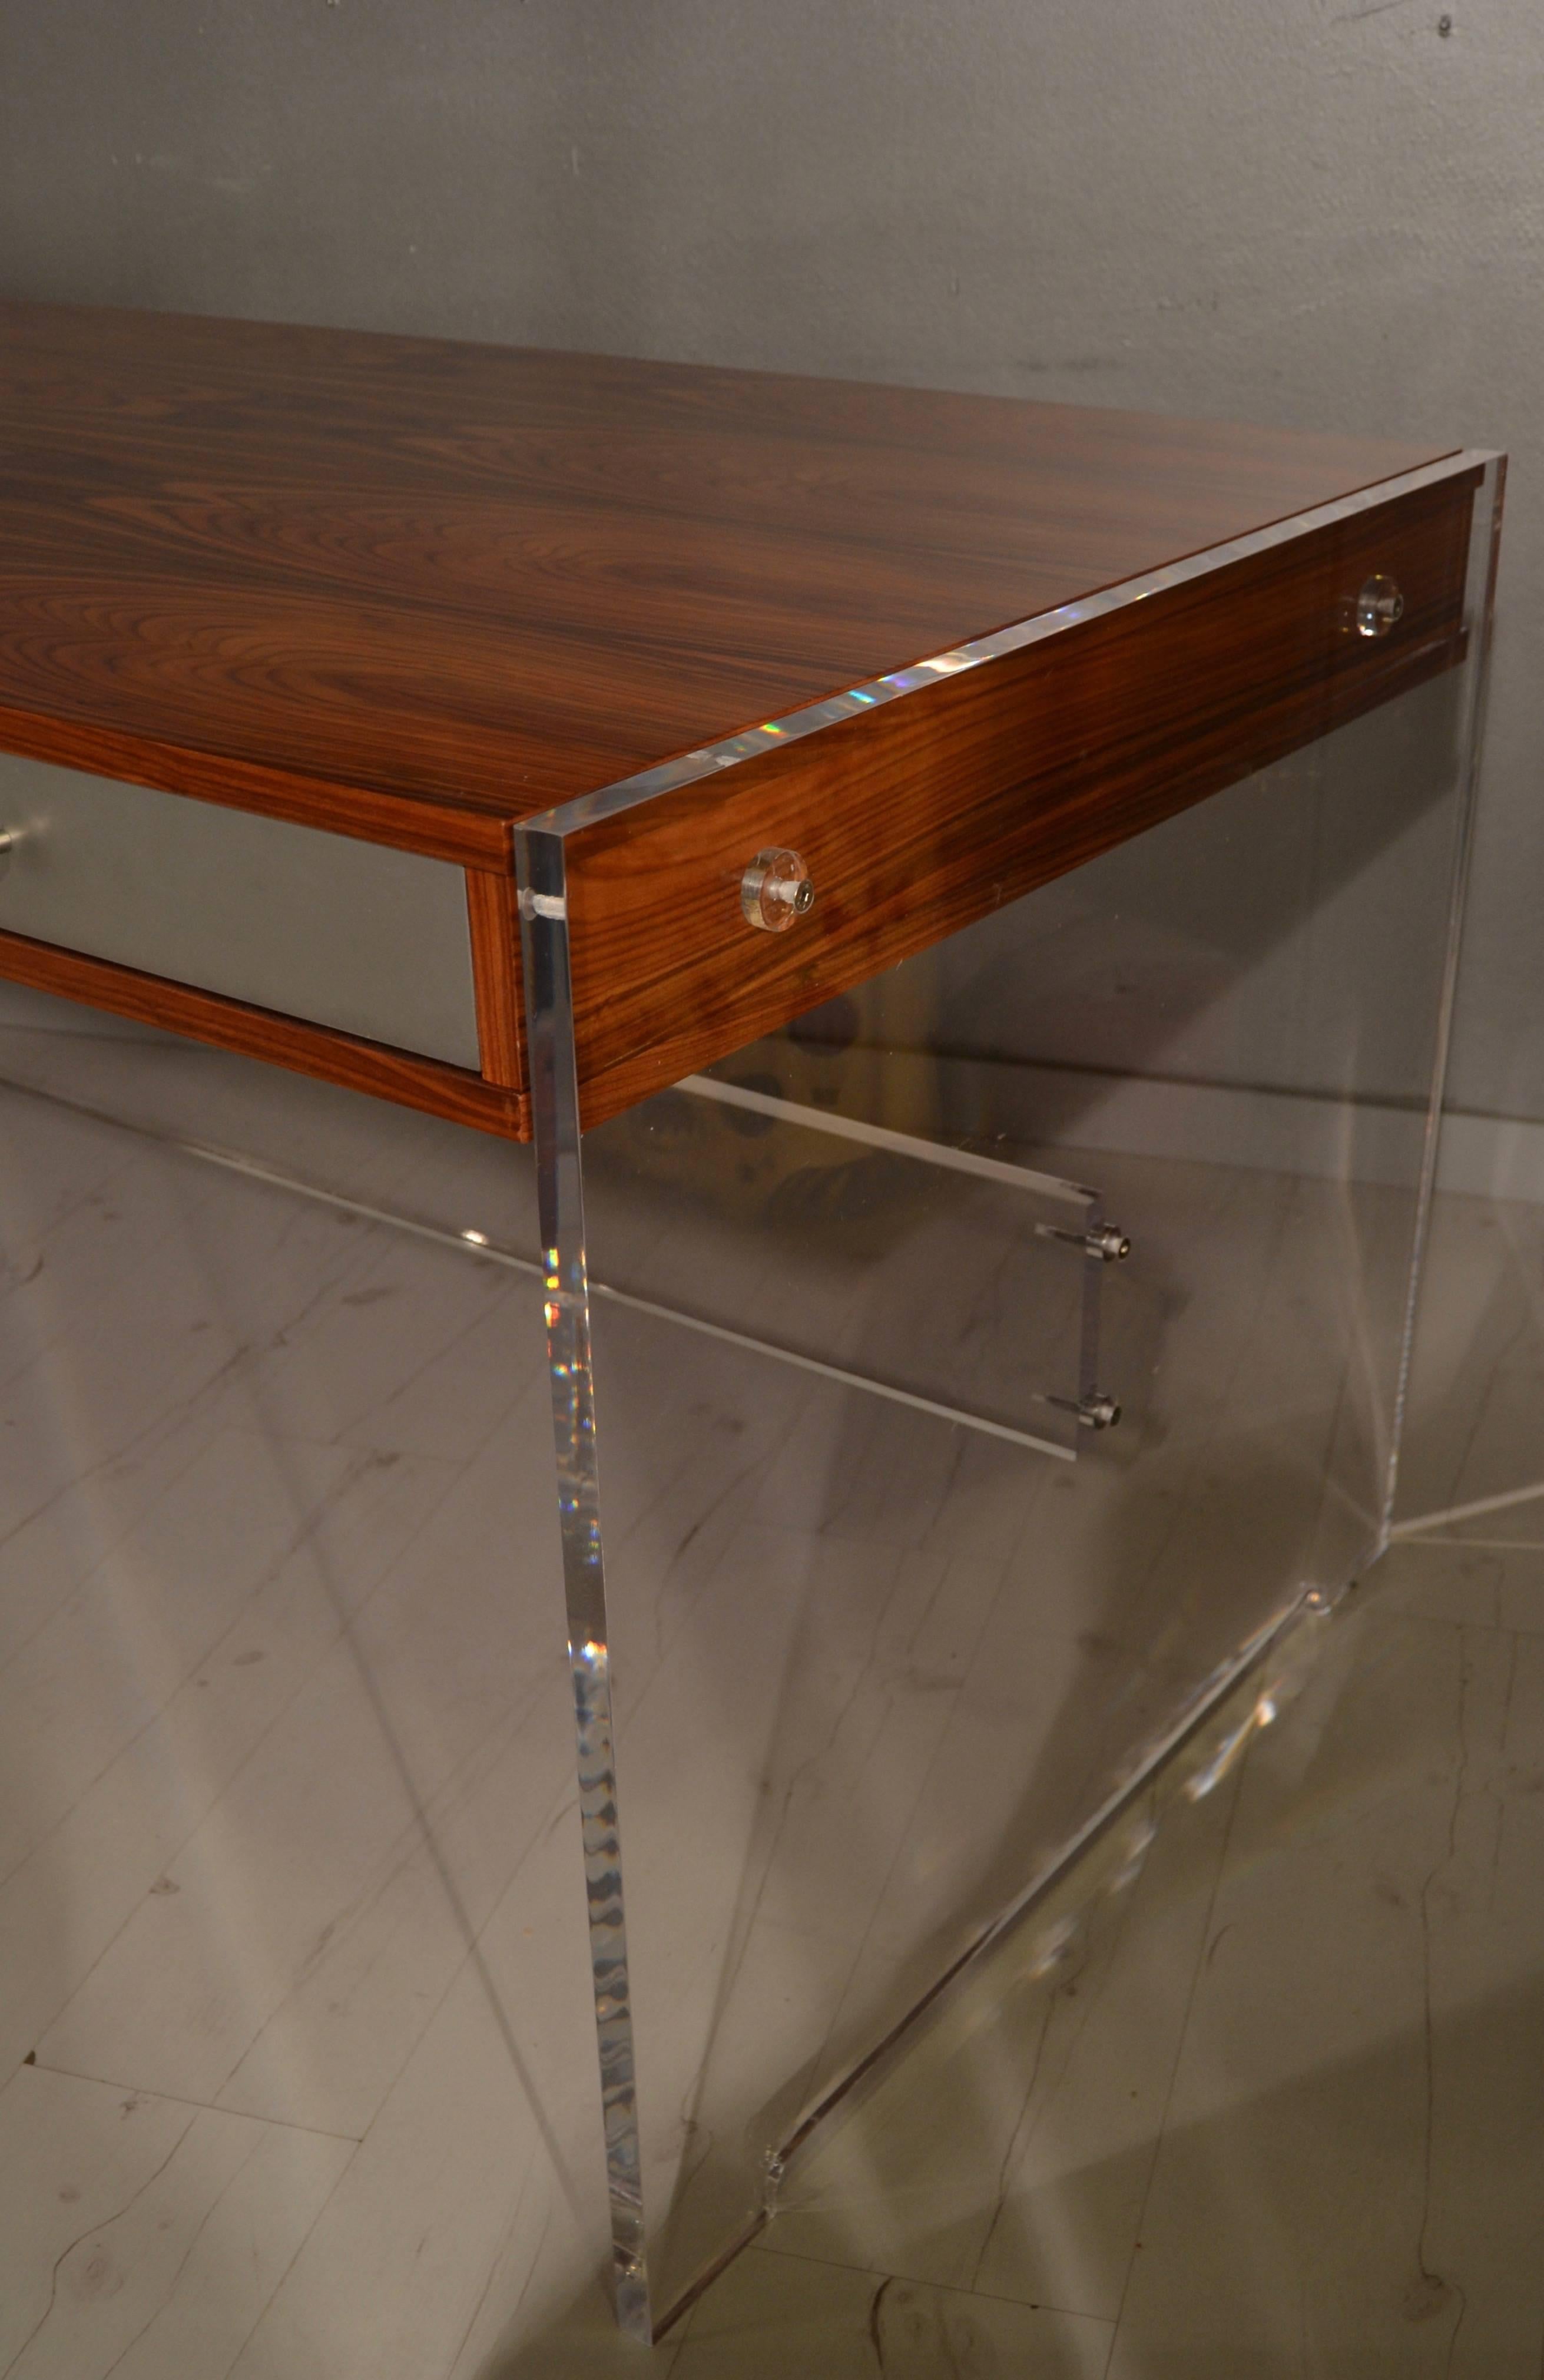 Poul Norreklit Desk in Mahogany and Lucite 1